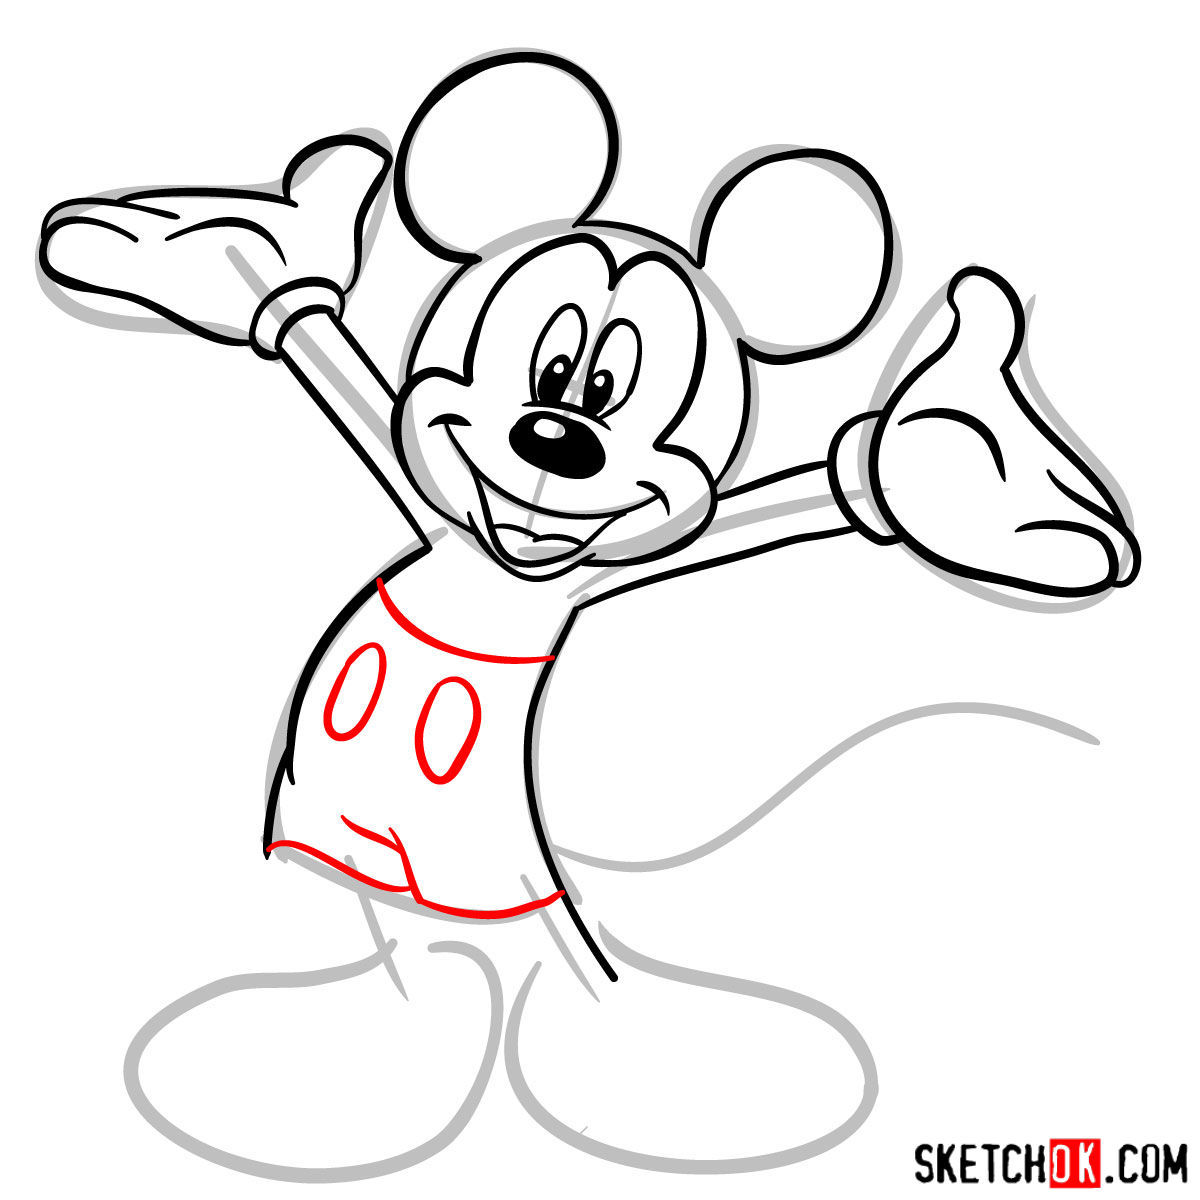 How to draw Mickey Mouse Sketchok easy drawing guides